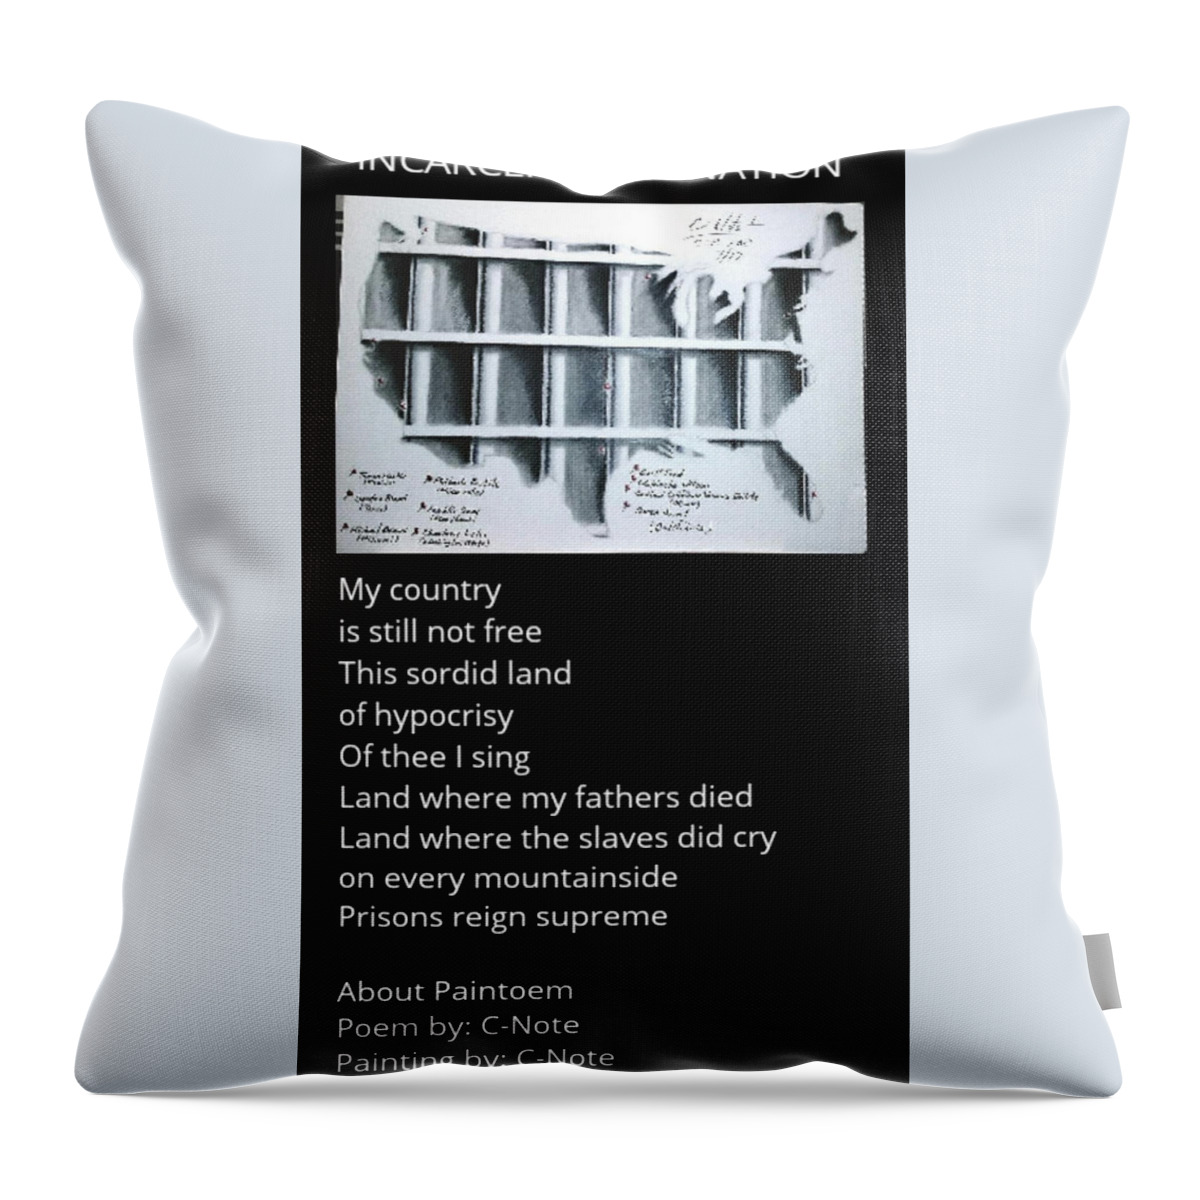 Black Art Throw Pillow featuring the drawing Incarceration Nation Paintoem by Donald C-Note Hooker